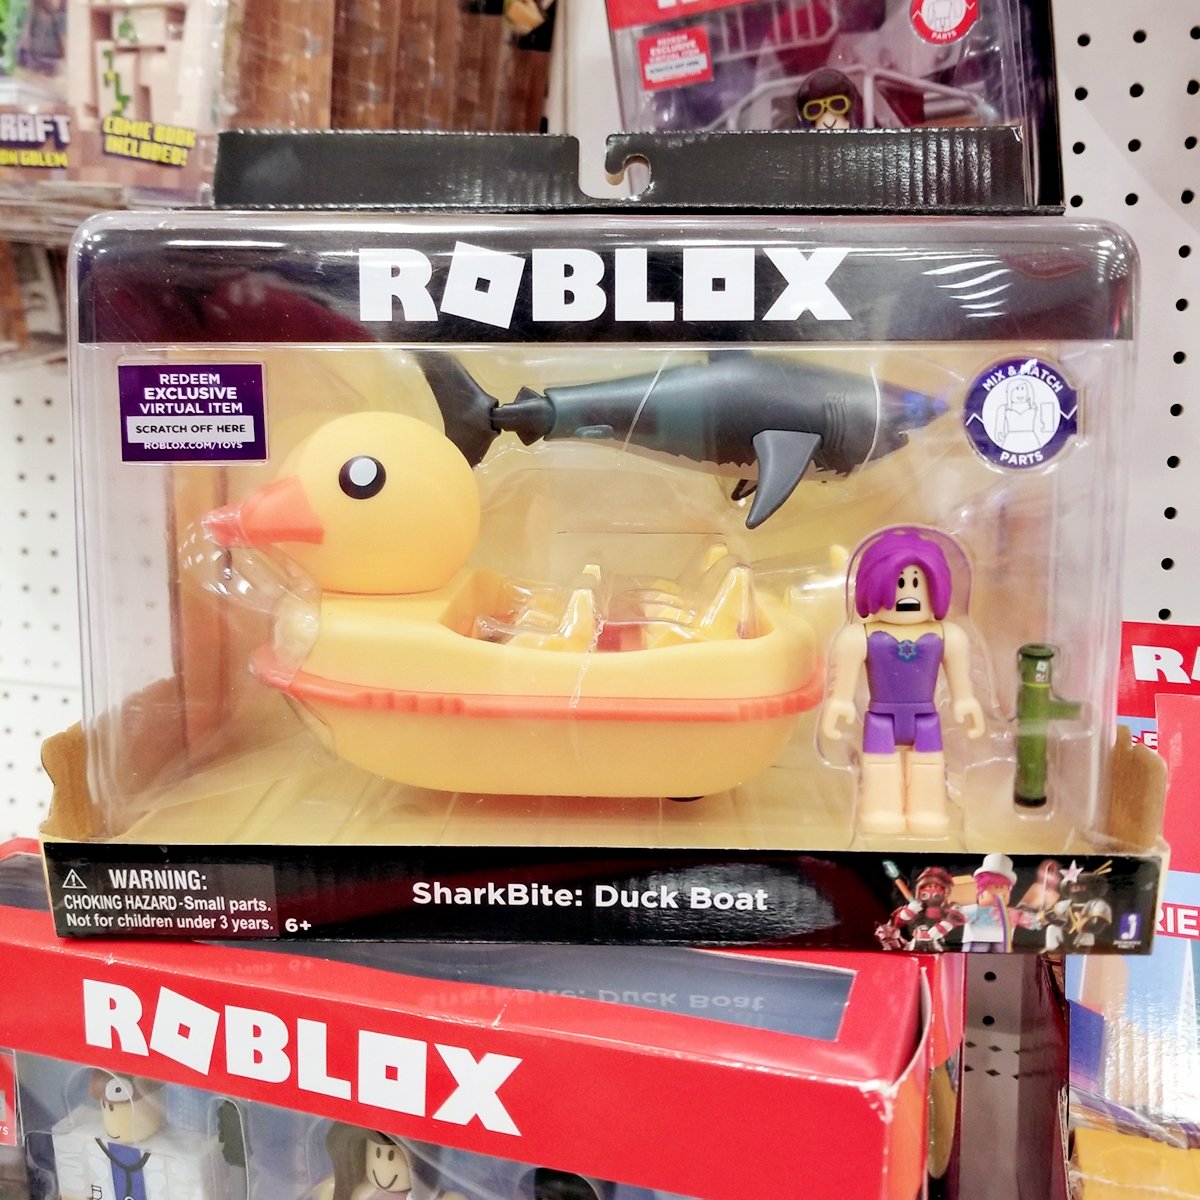 Dollastic On Twitter We Found This At Target 2017 Rdc London